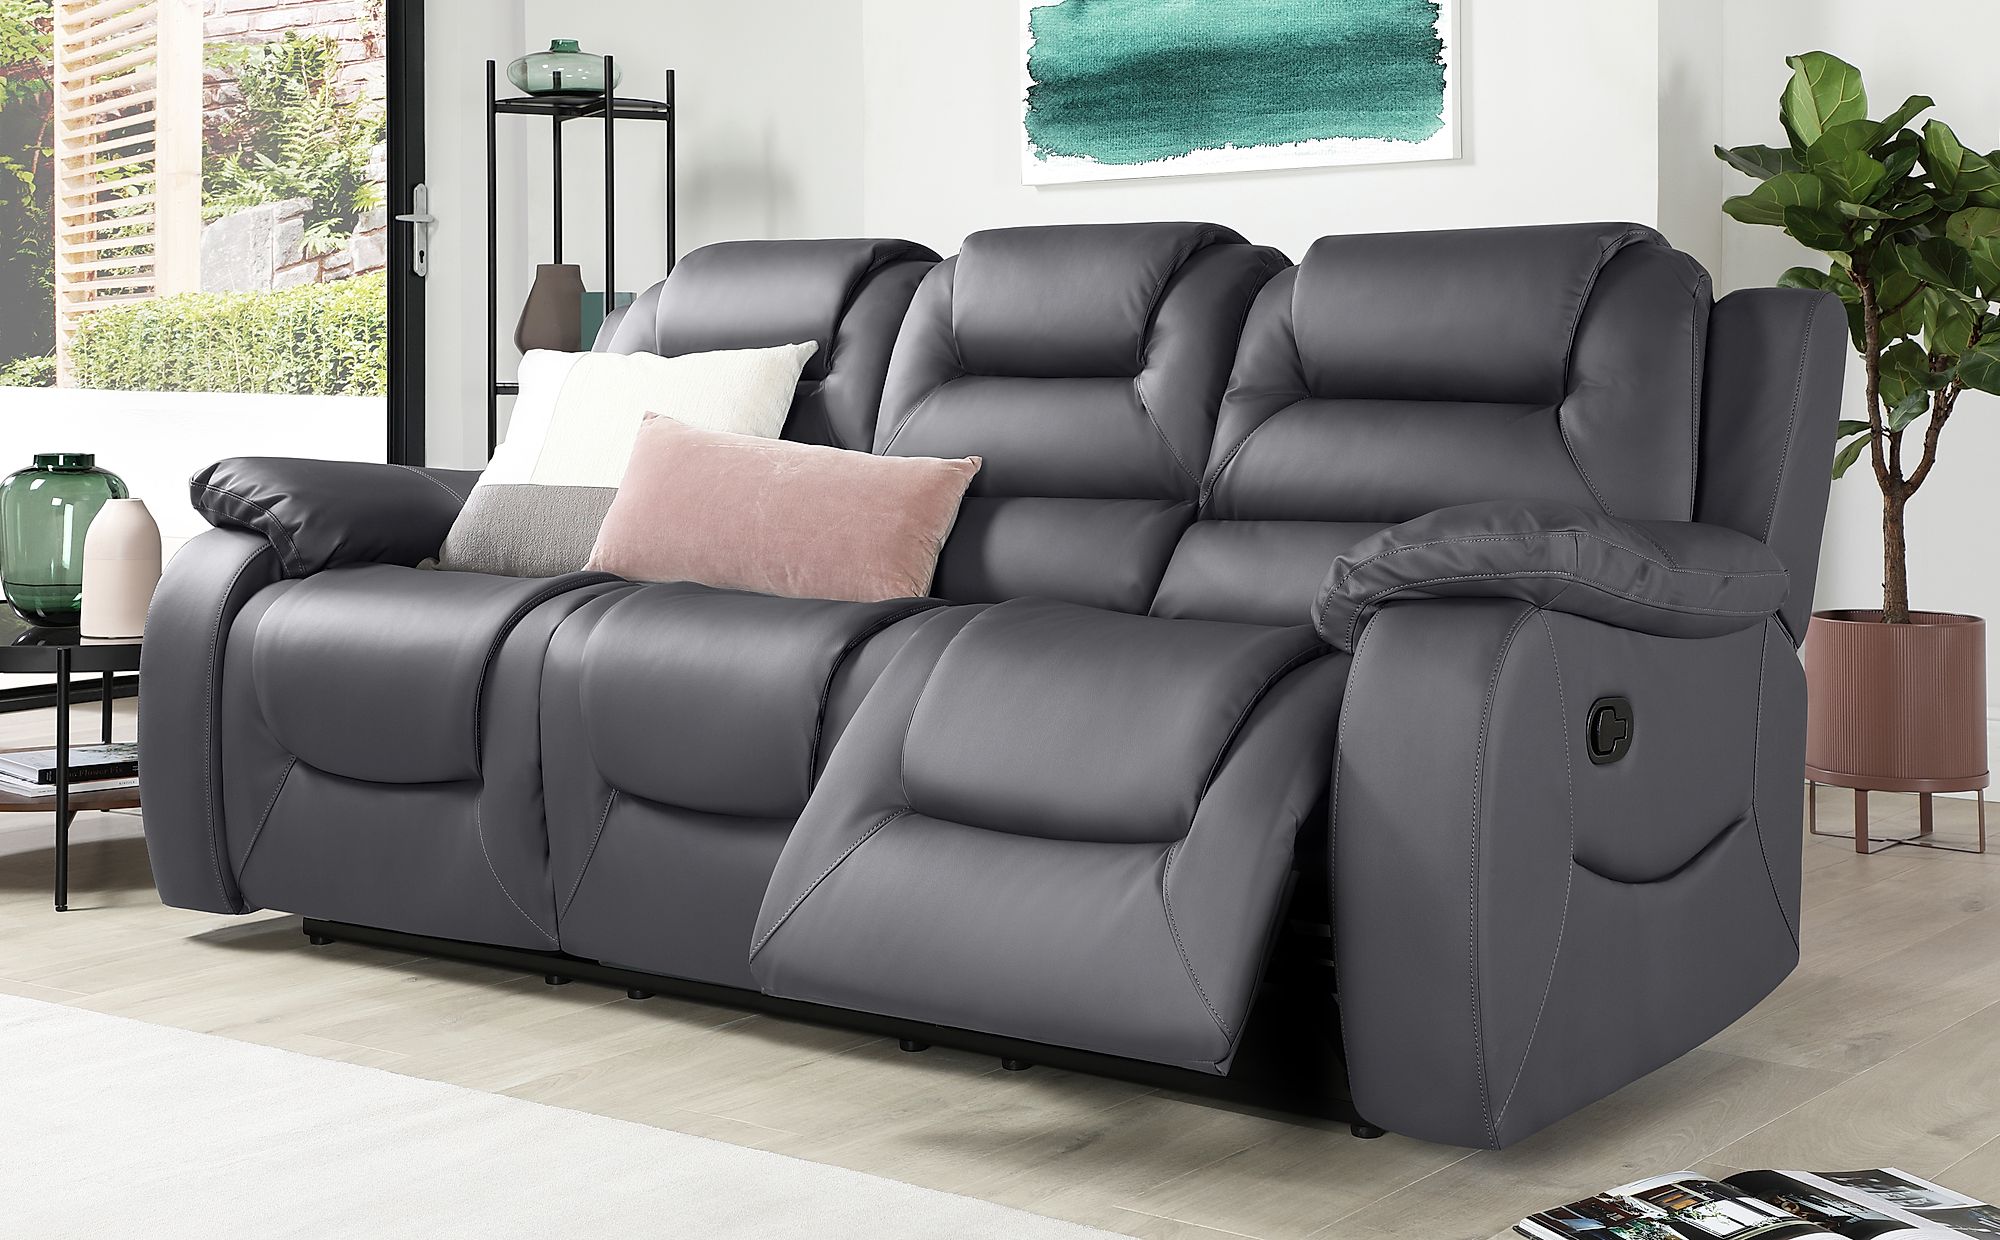 leather reclining theater sofa seating 3 seat